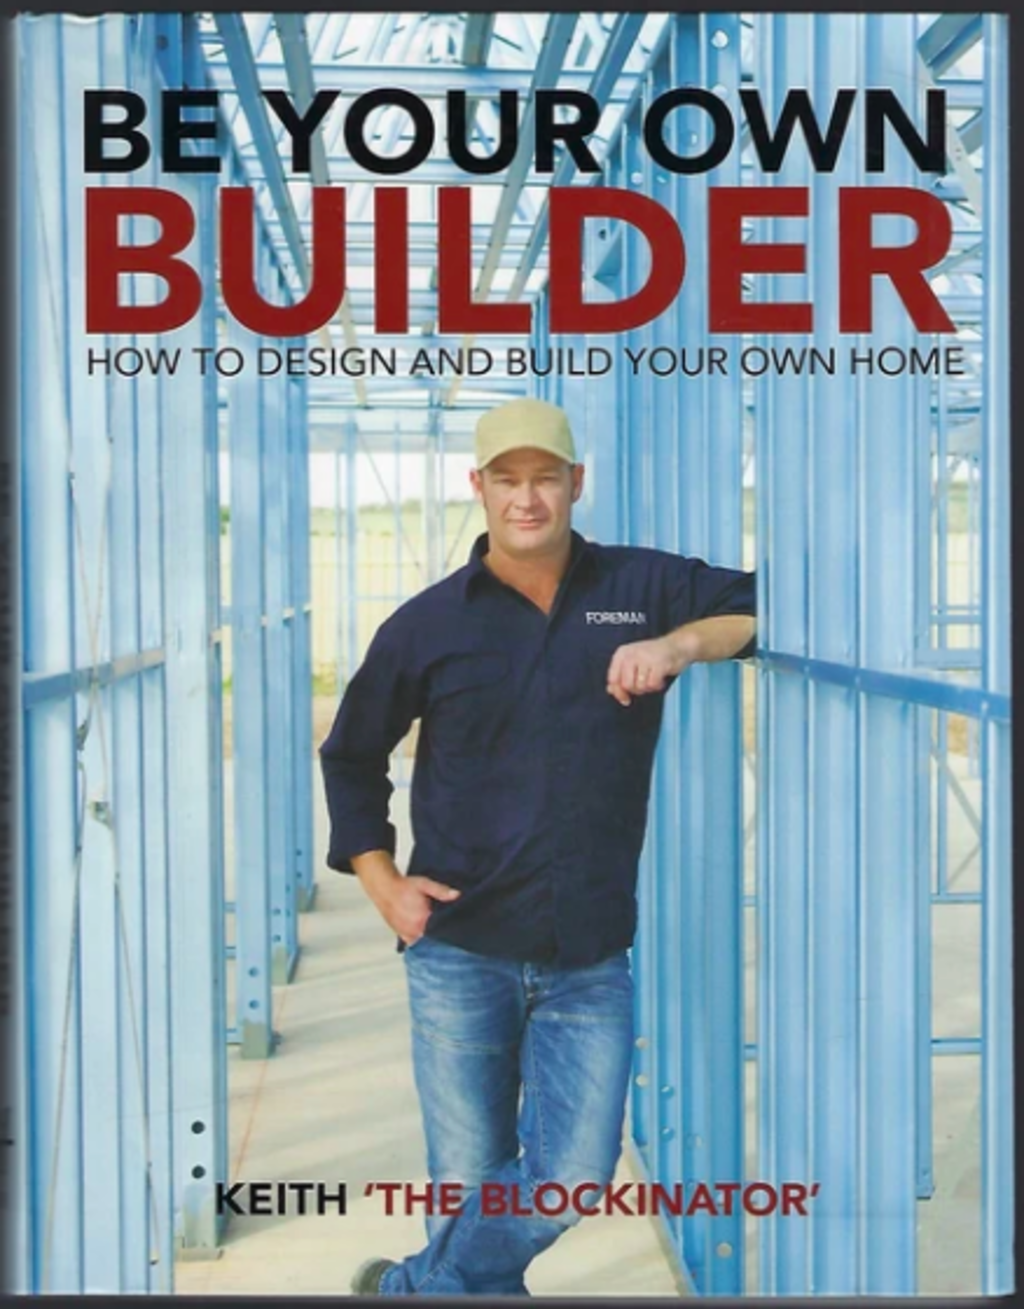 'Be Your Own Builder' by Keith 'The Blockinator', RRP $29.